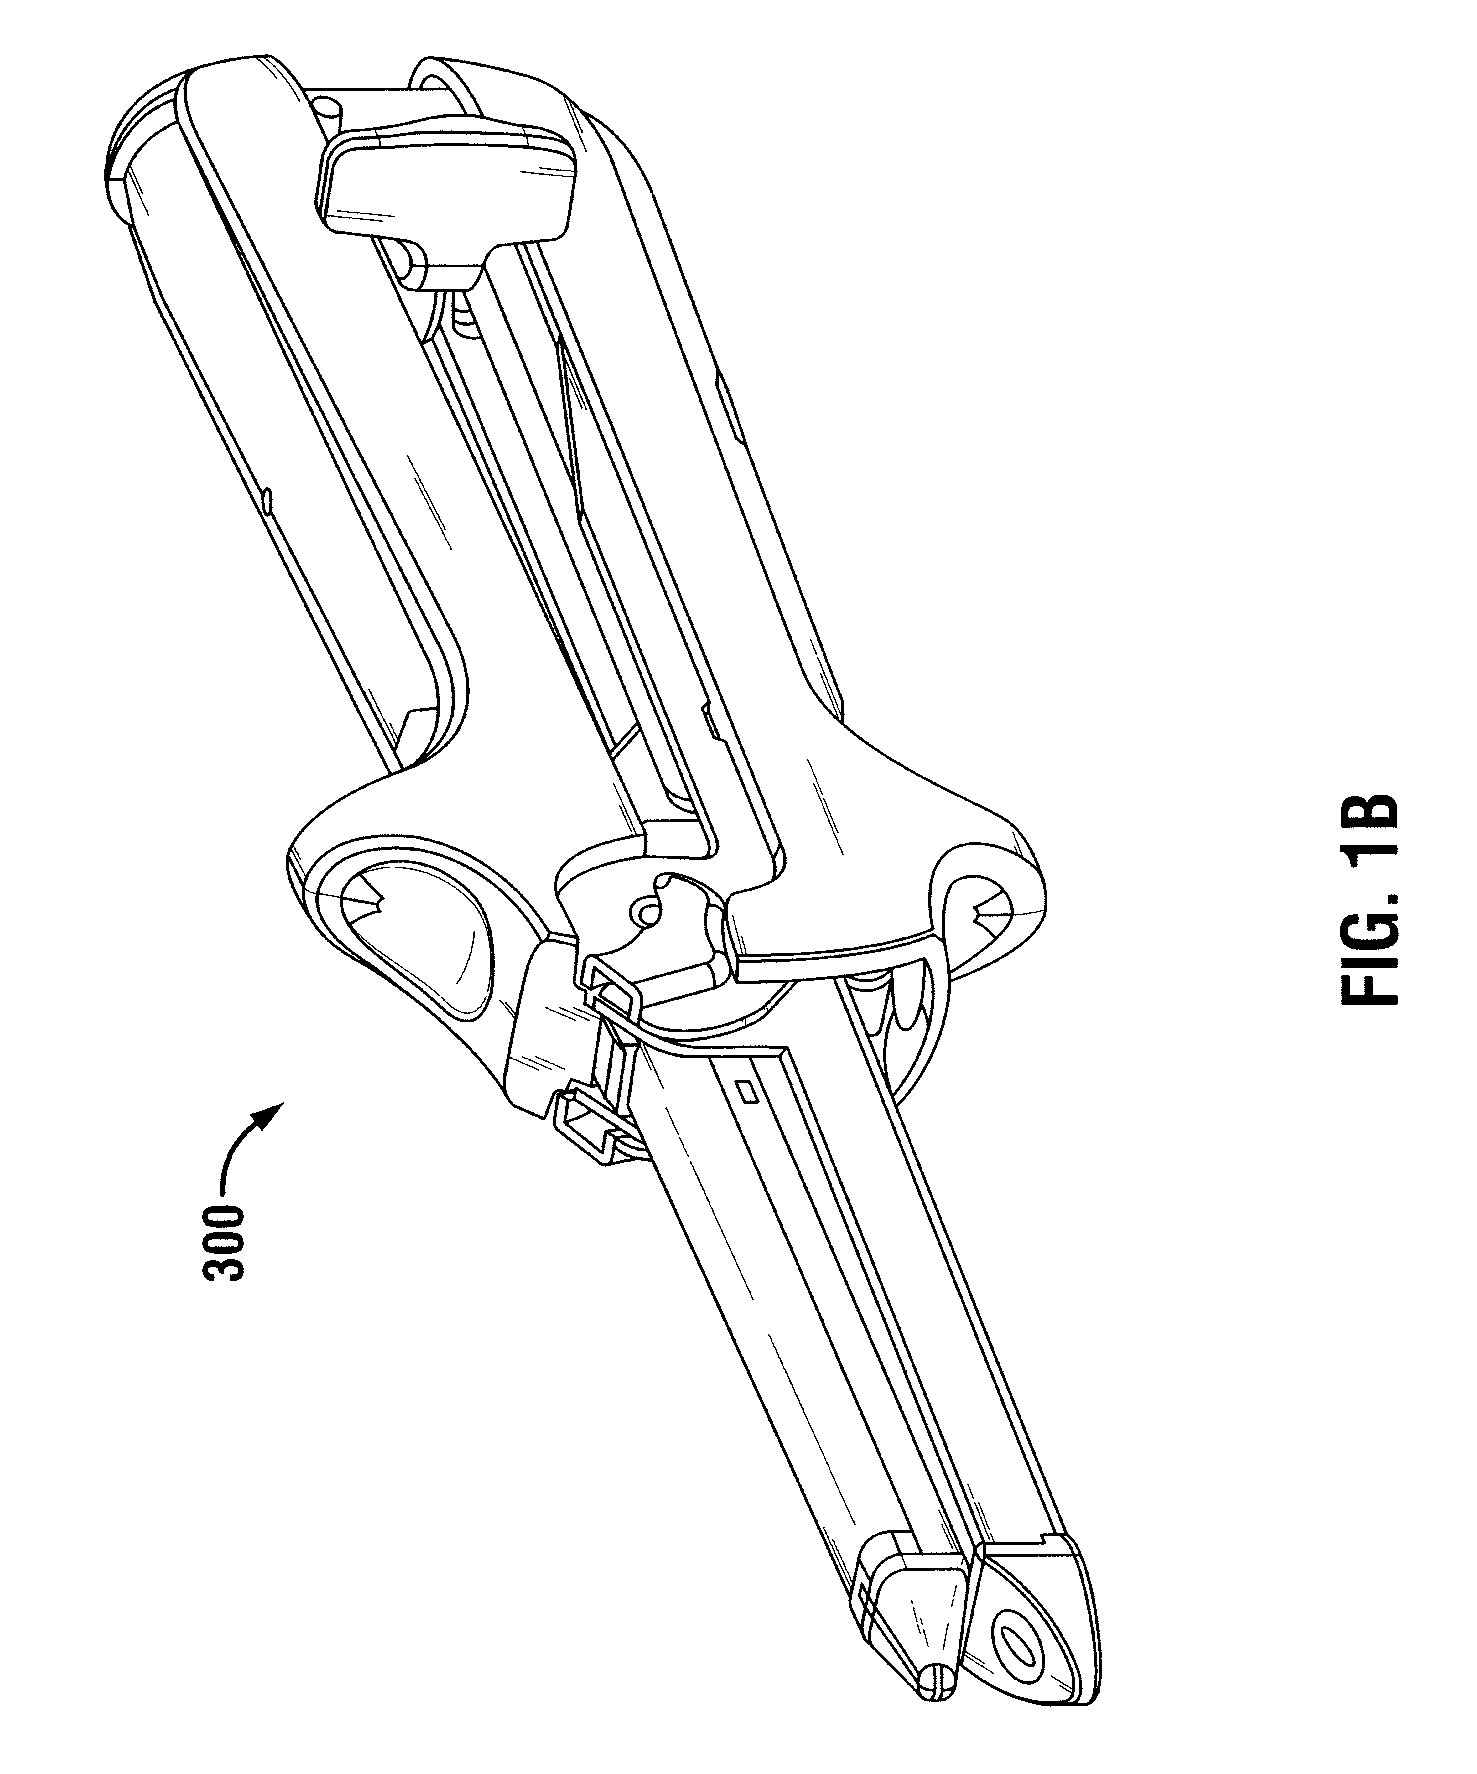 Surgical instrument for joining tissue